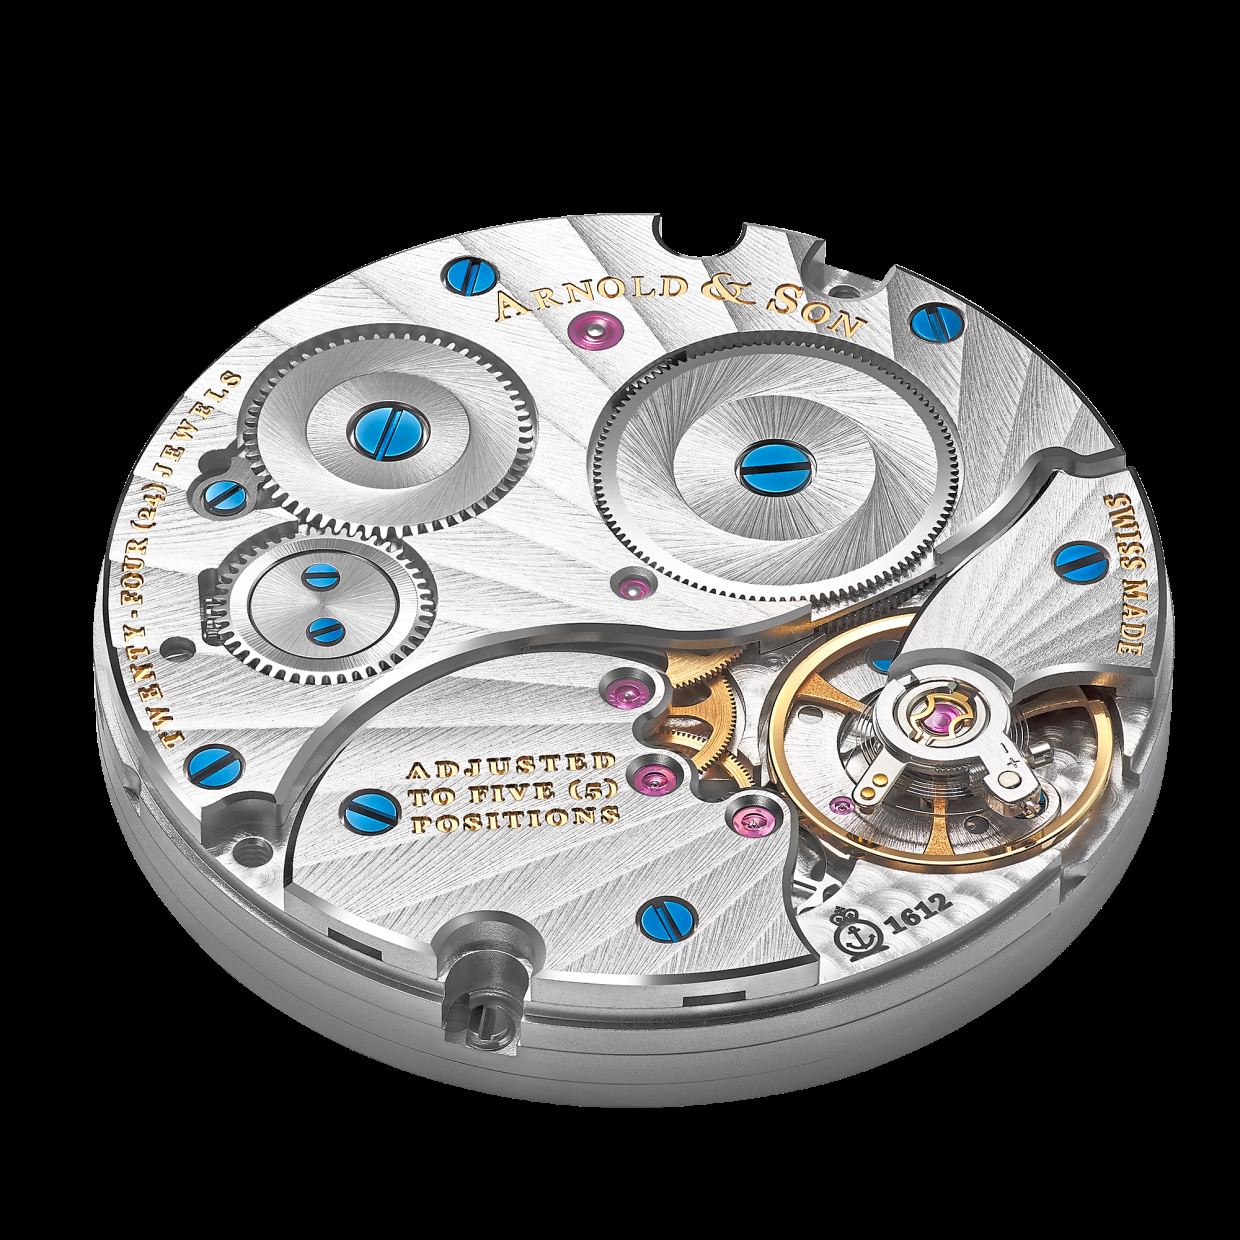 Distinctive by design: Arnold & Son's pursuit of revolution in watchmaking